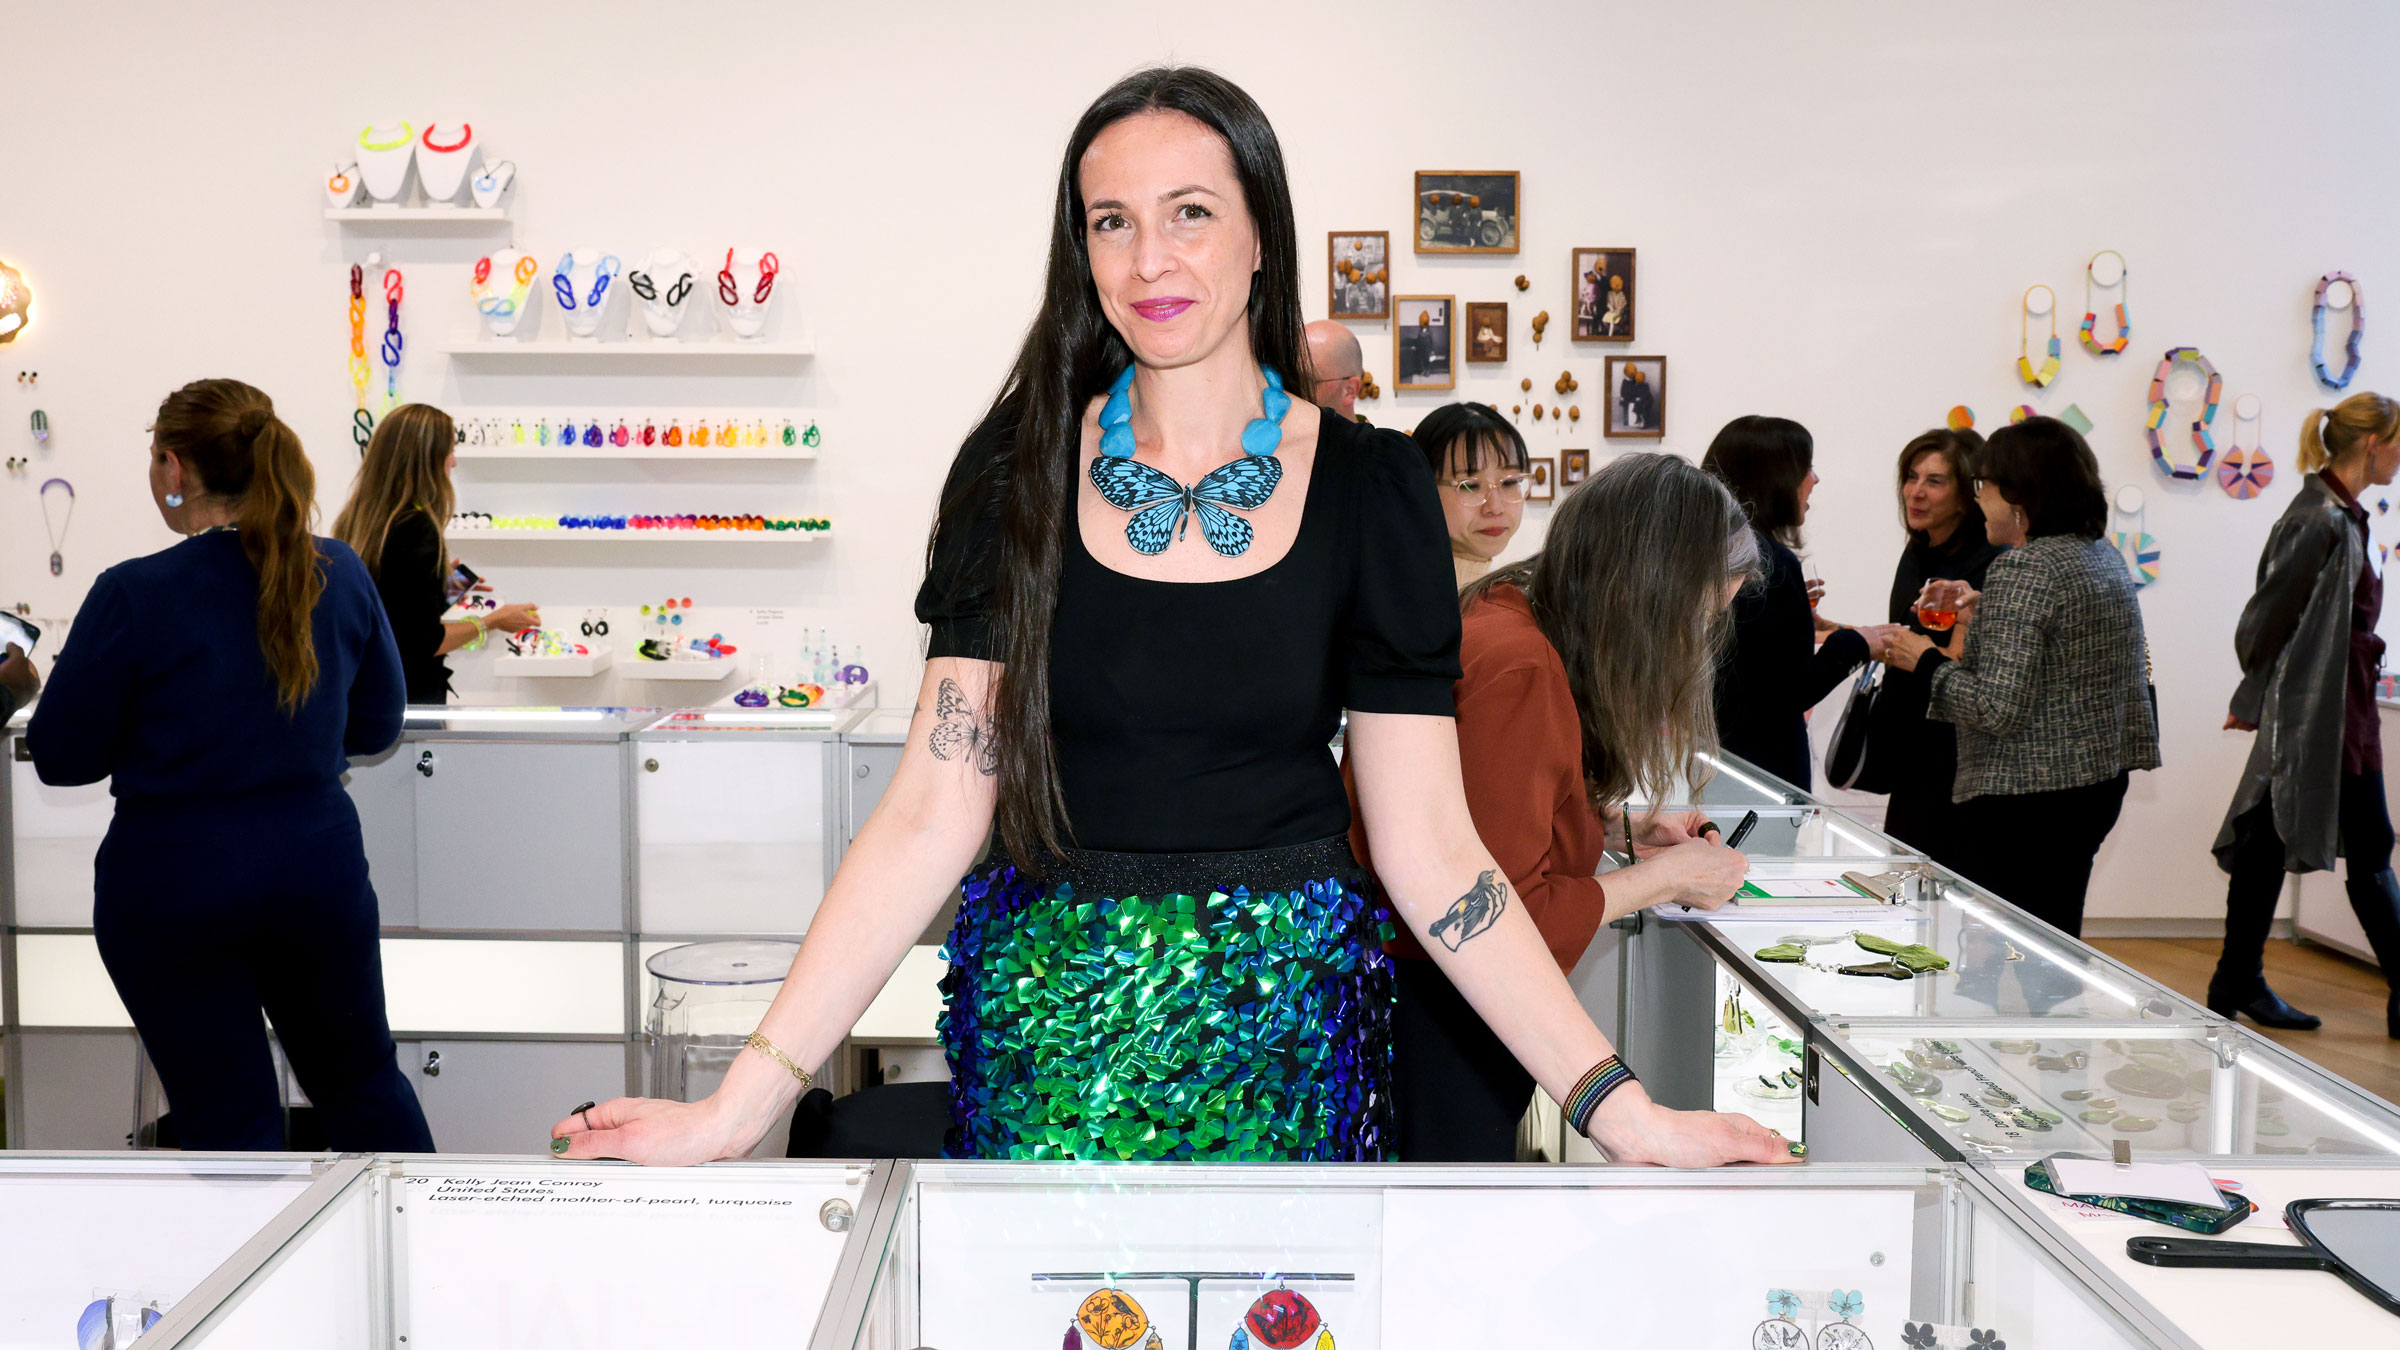 New York | Curator-Led Tour of MAD About Jewelry